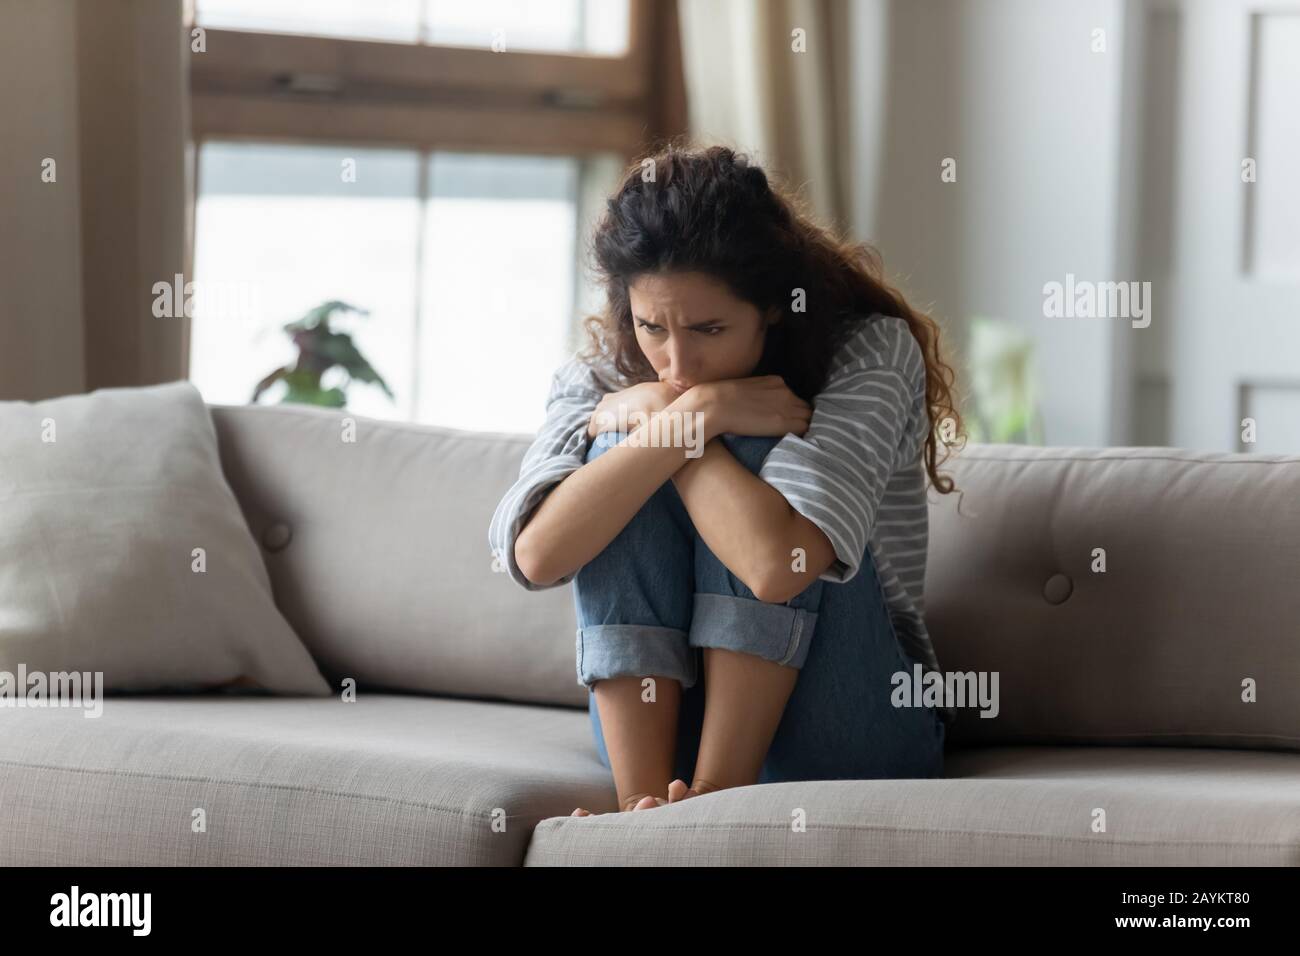 Stressed young woman embracing knees, sitting alone on couch. Stock Photo